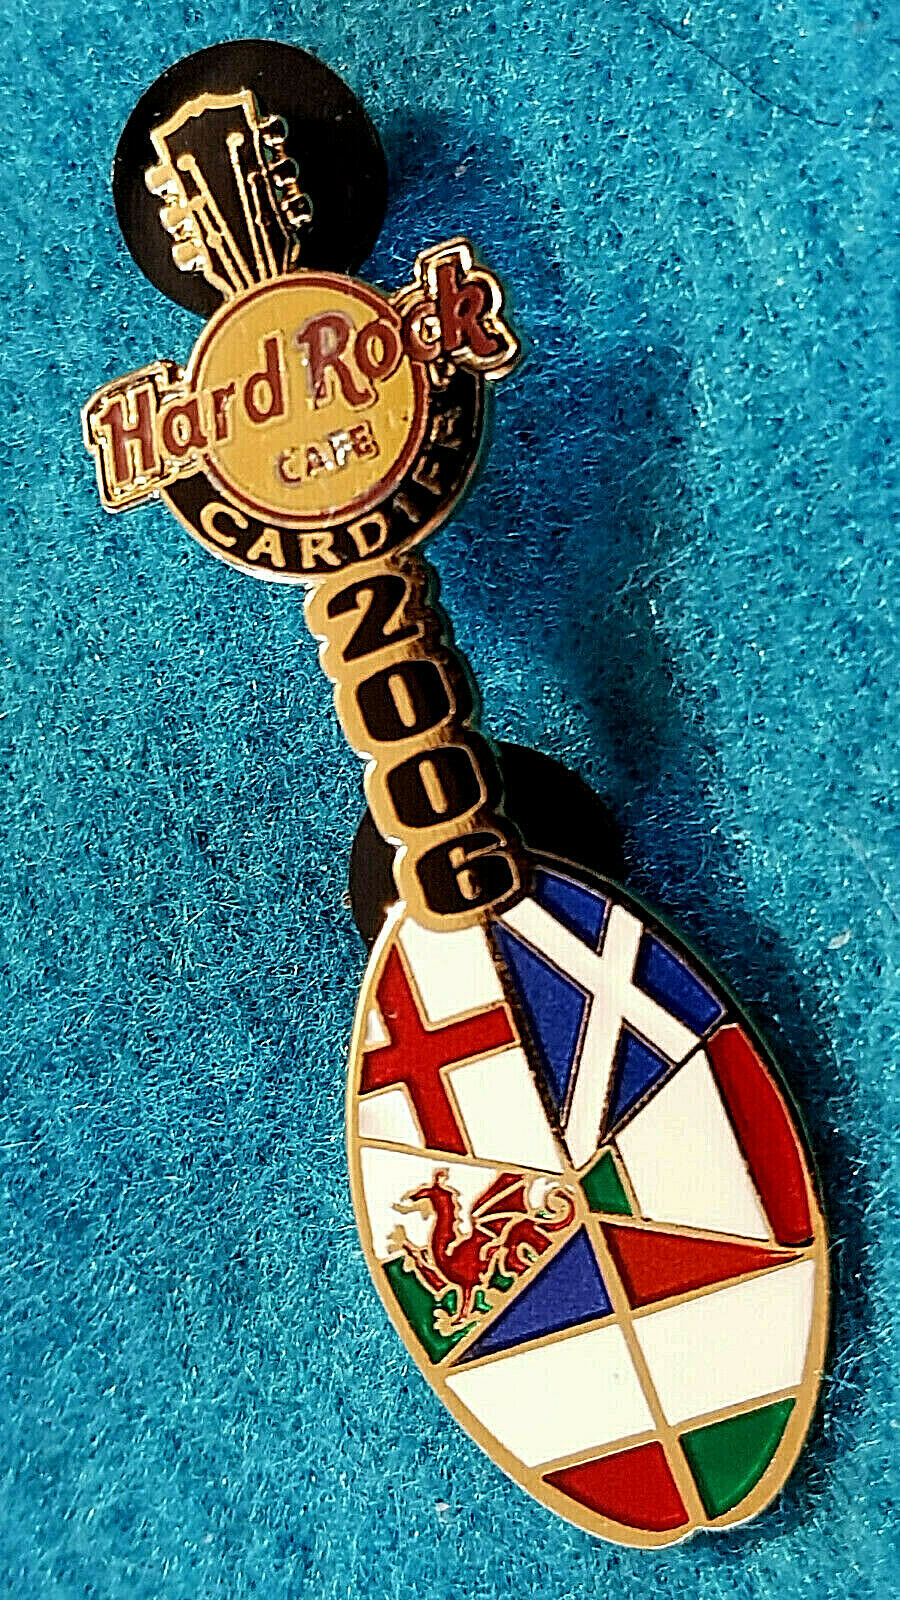 Cardiff Wales 6 Nations Flags Rugby Union Ball Guitar 2006 Hard Rock Cafe Pin